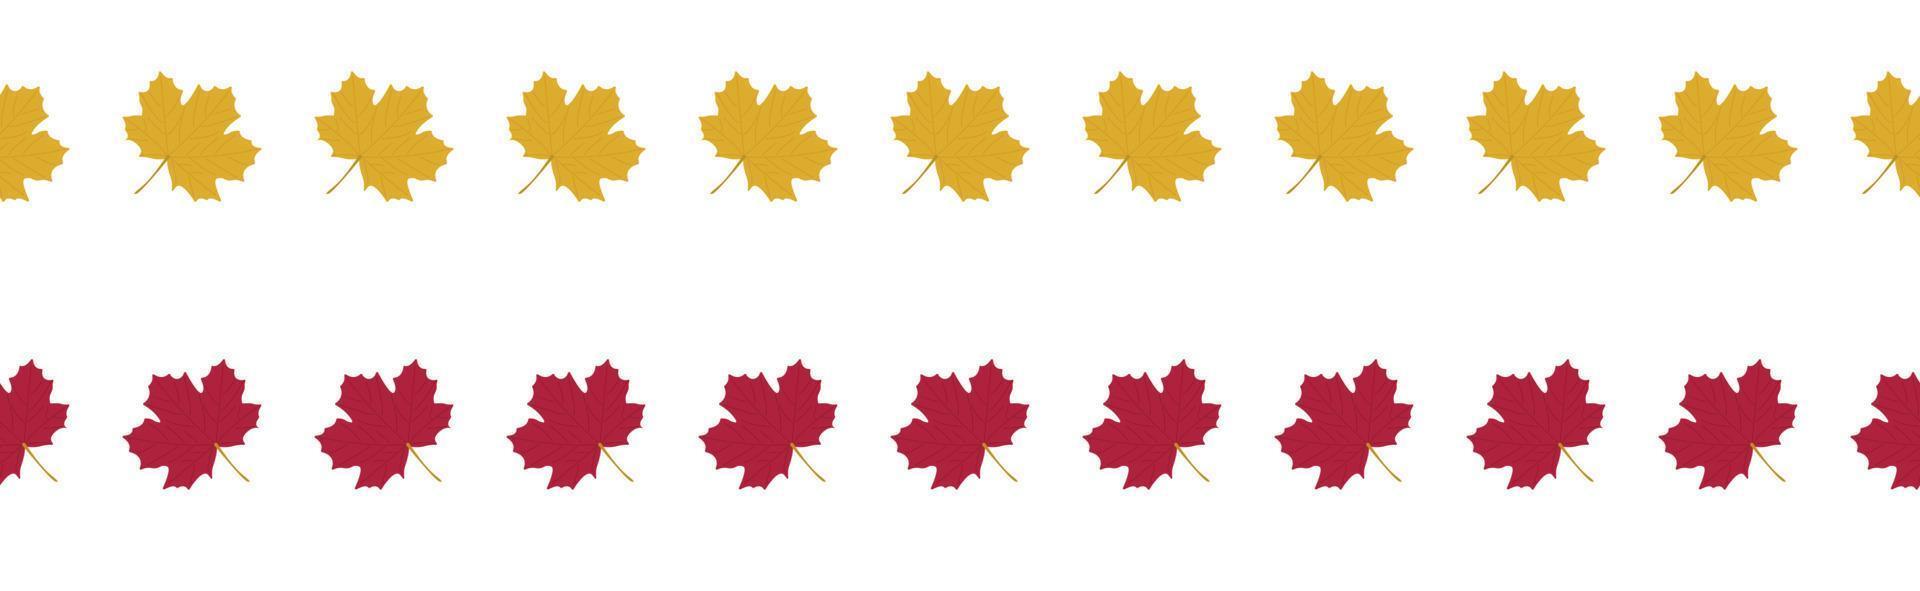 Decorative seamless border of rat and yellow maple leaves vector